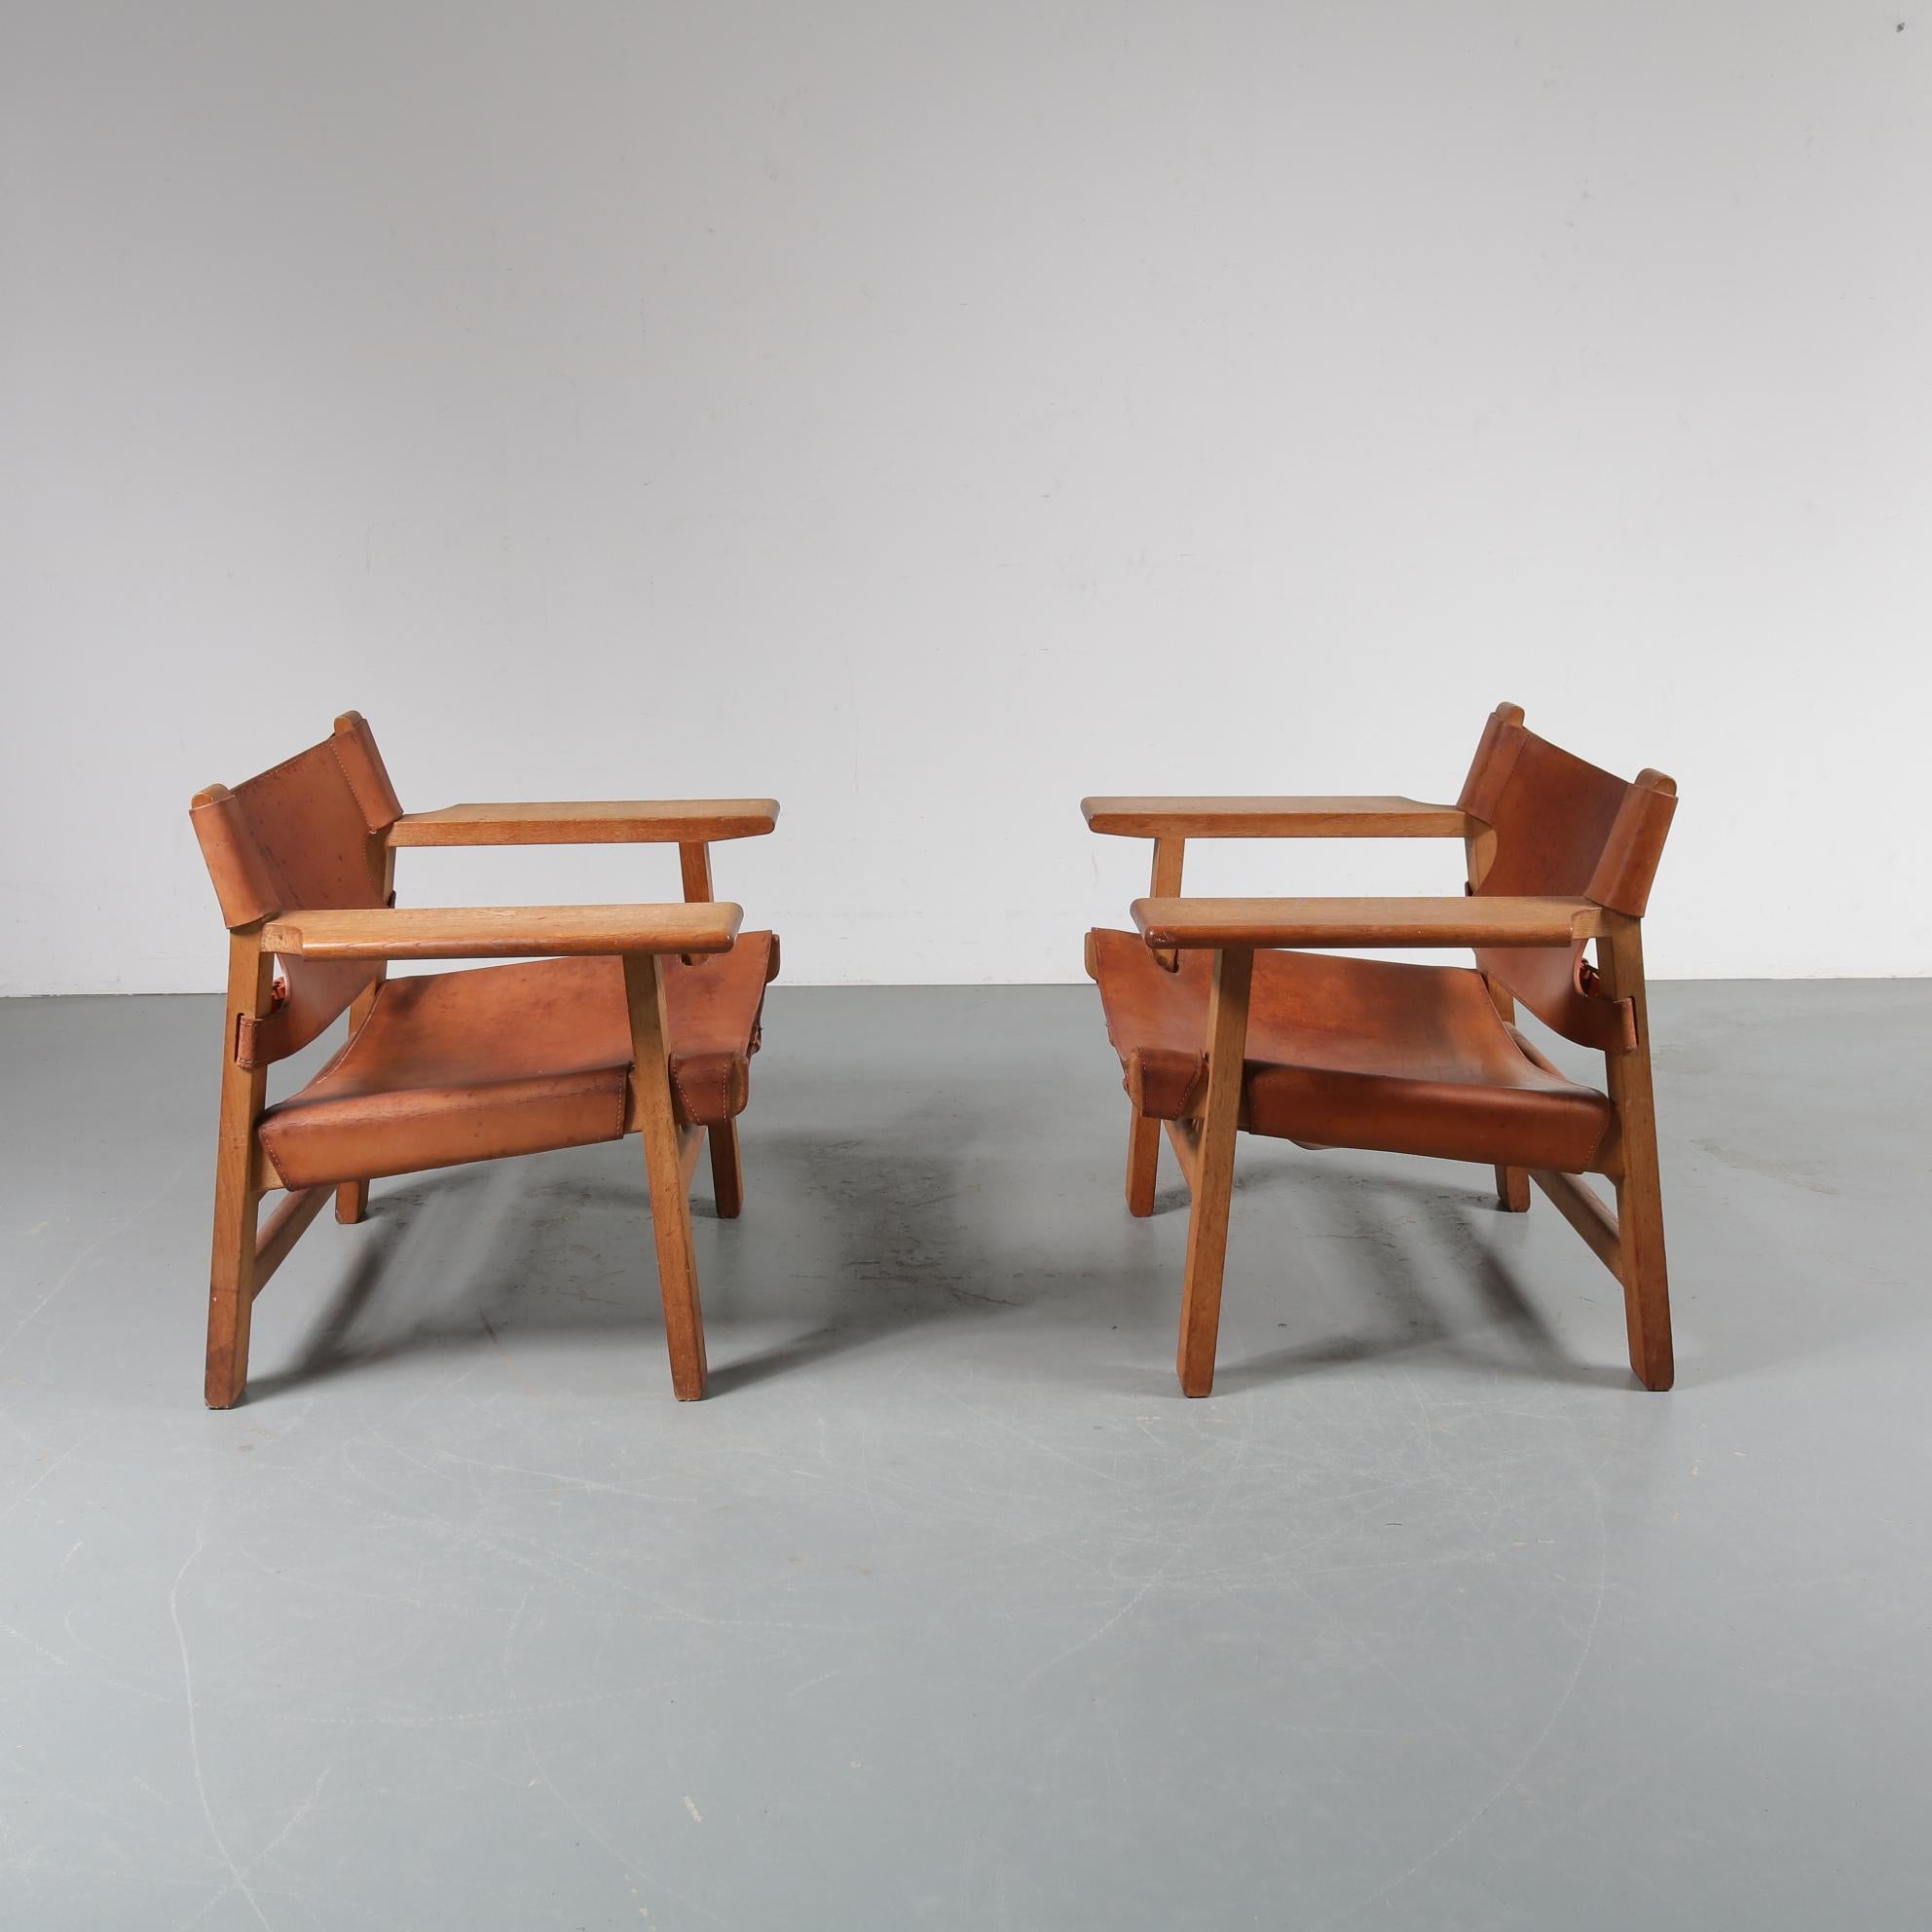 Leather Pair of Borge Mogensen Spanish Chairs for Fredericia, Denmark, 1950